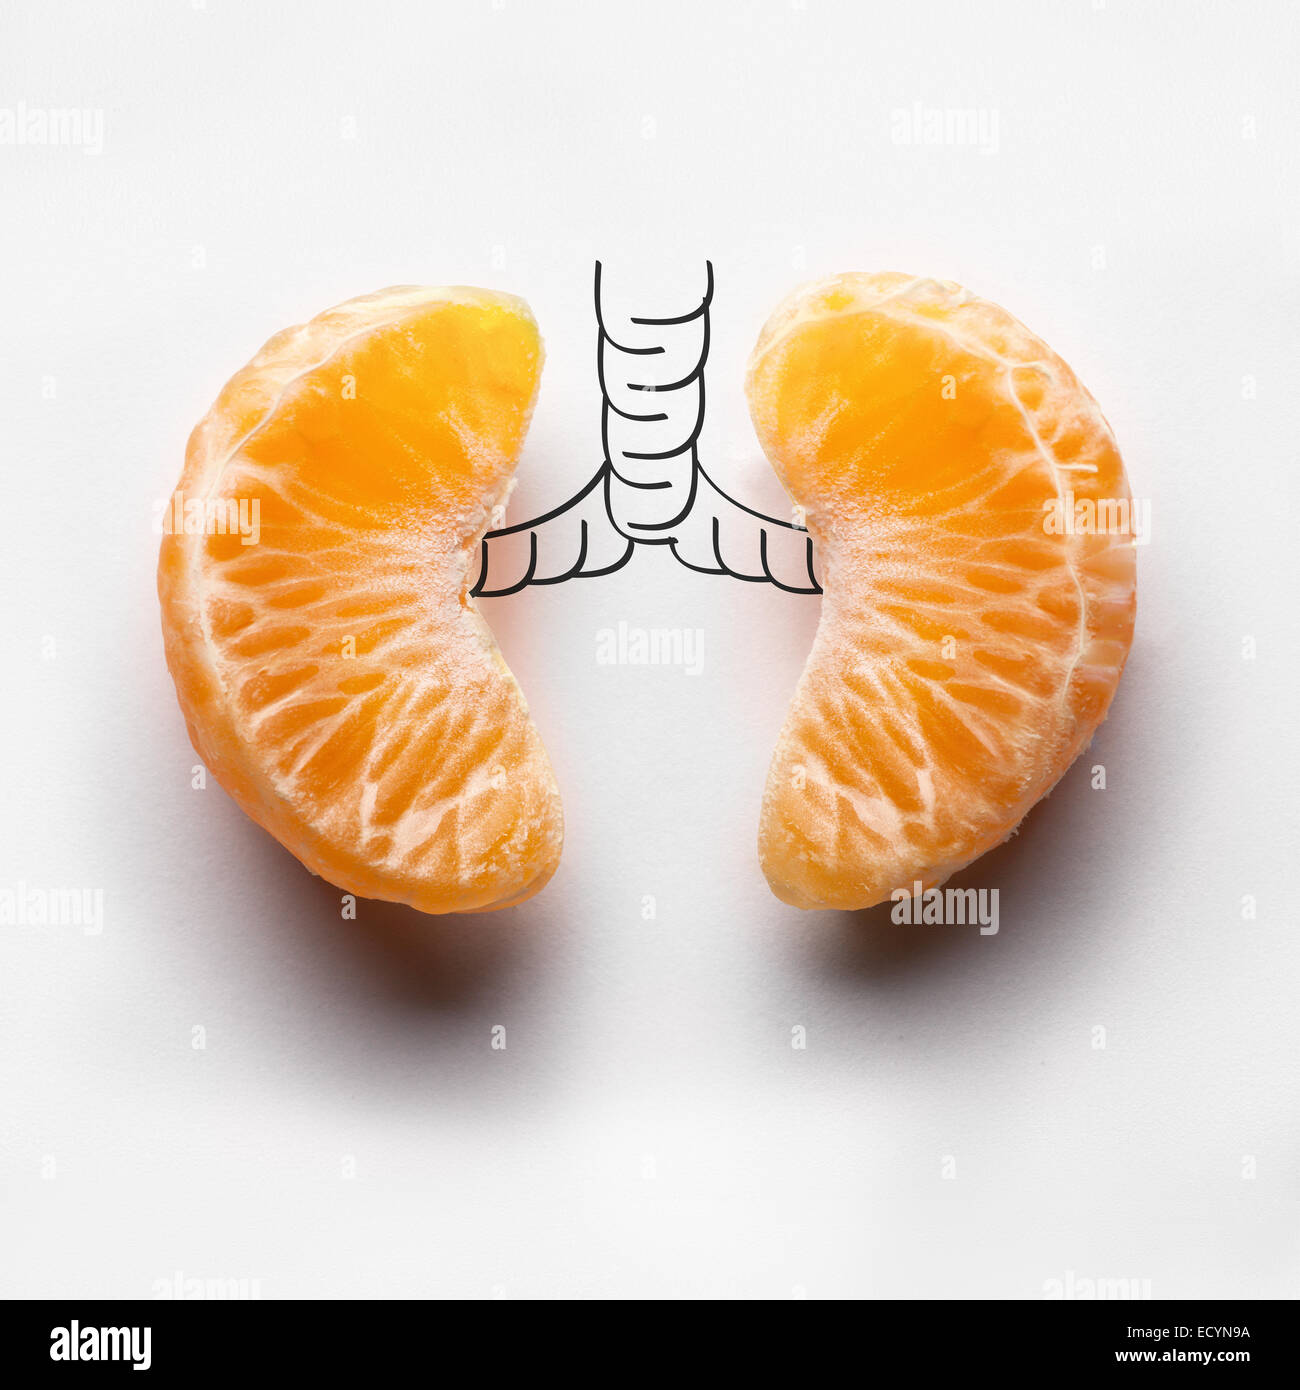 A health concept of unhealthy human lungs of a smoker with lung cancer in dark shadows, made of mandarin segments. Stock Photo